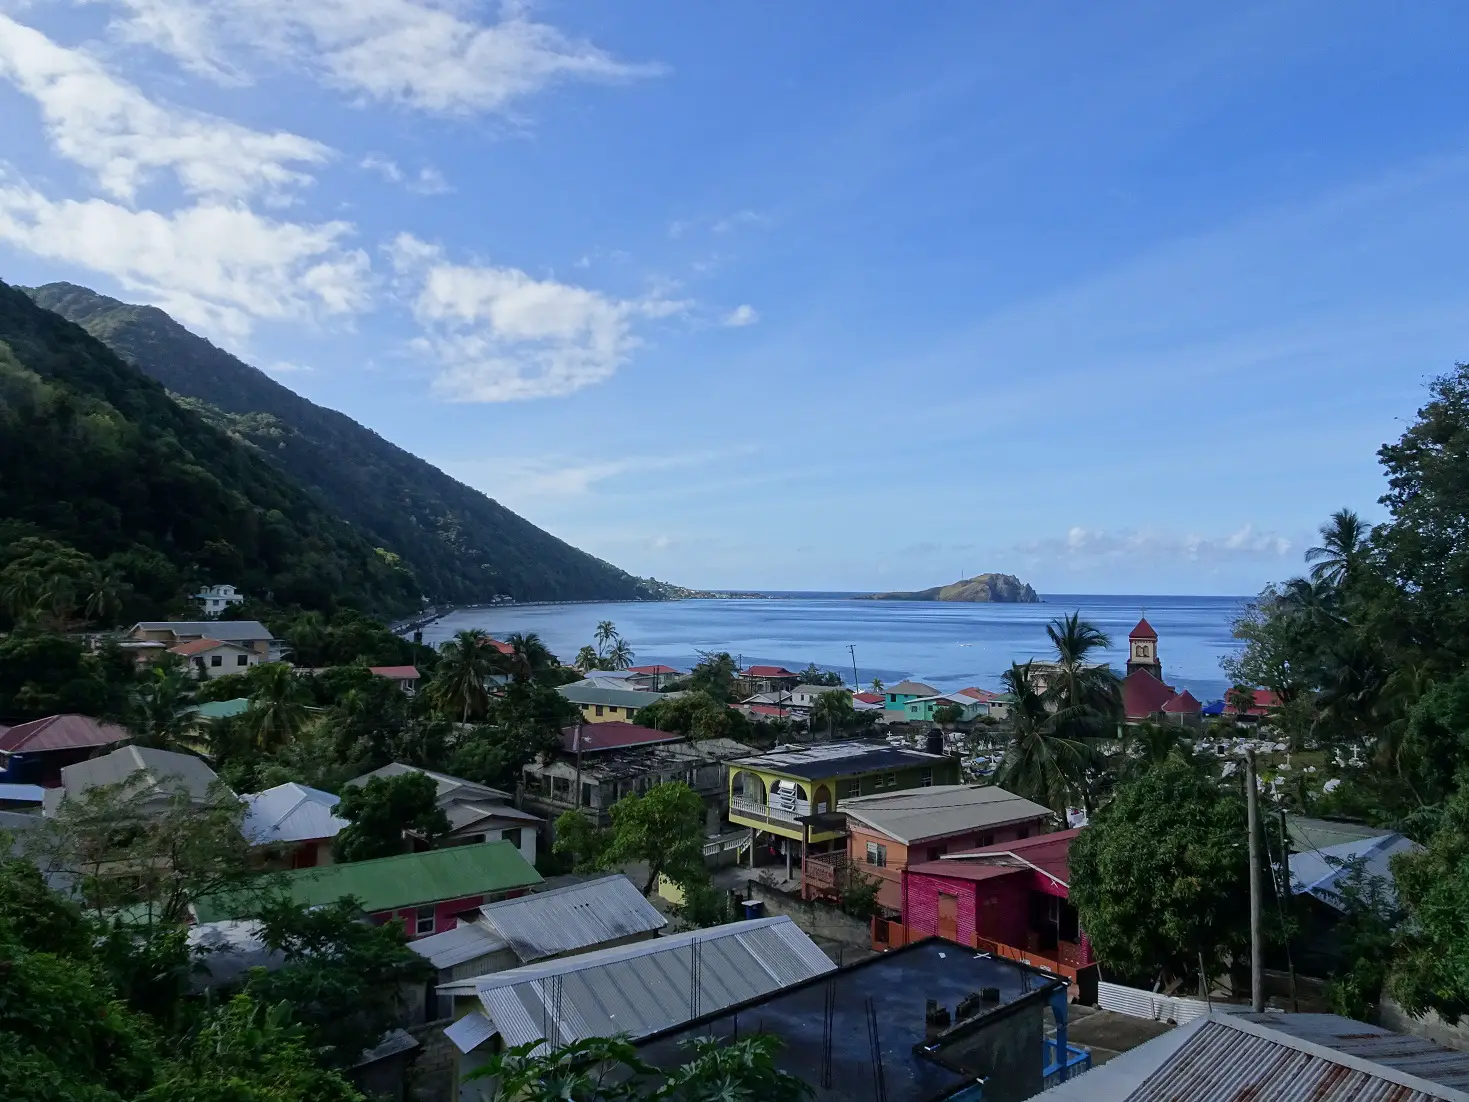 A view of a colourful tropical village near the sea in Soufrière, Dominica